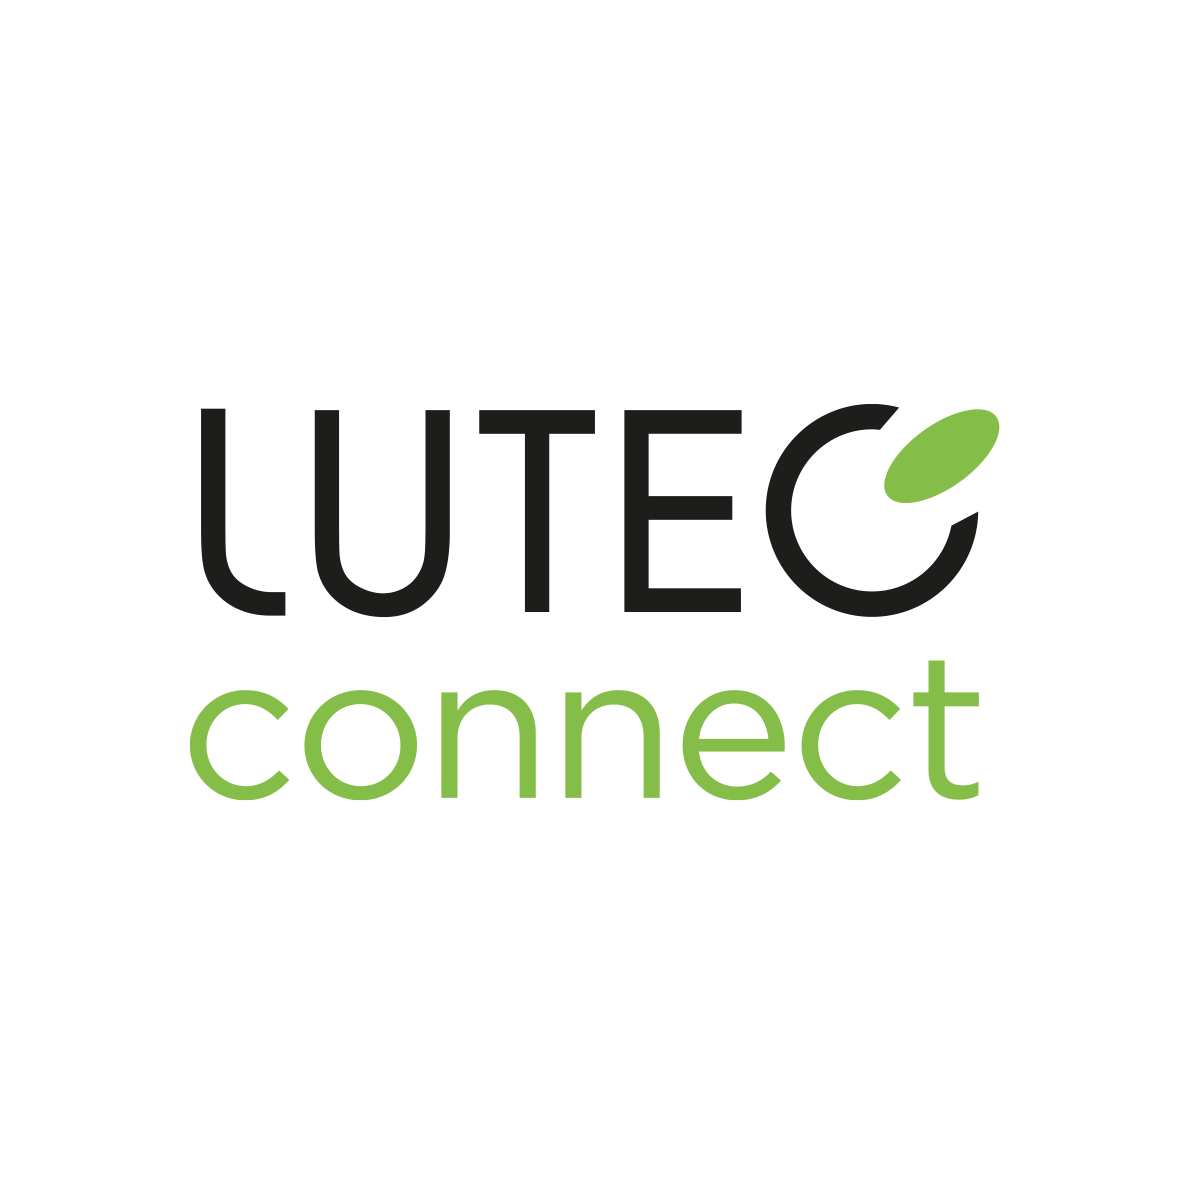 LUTEC connect